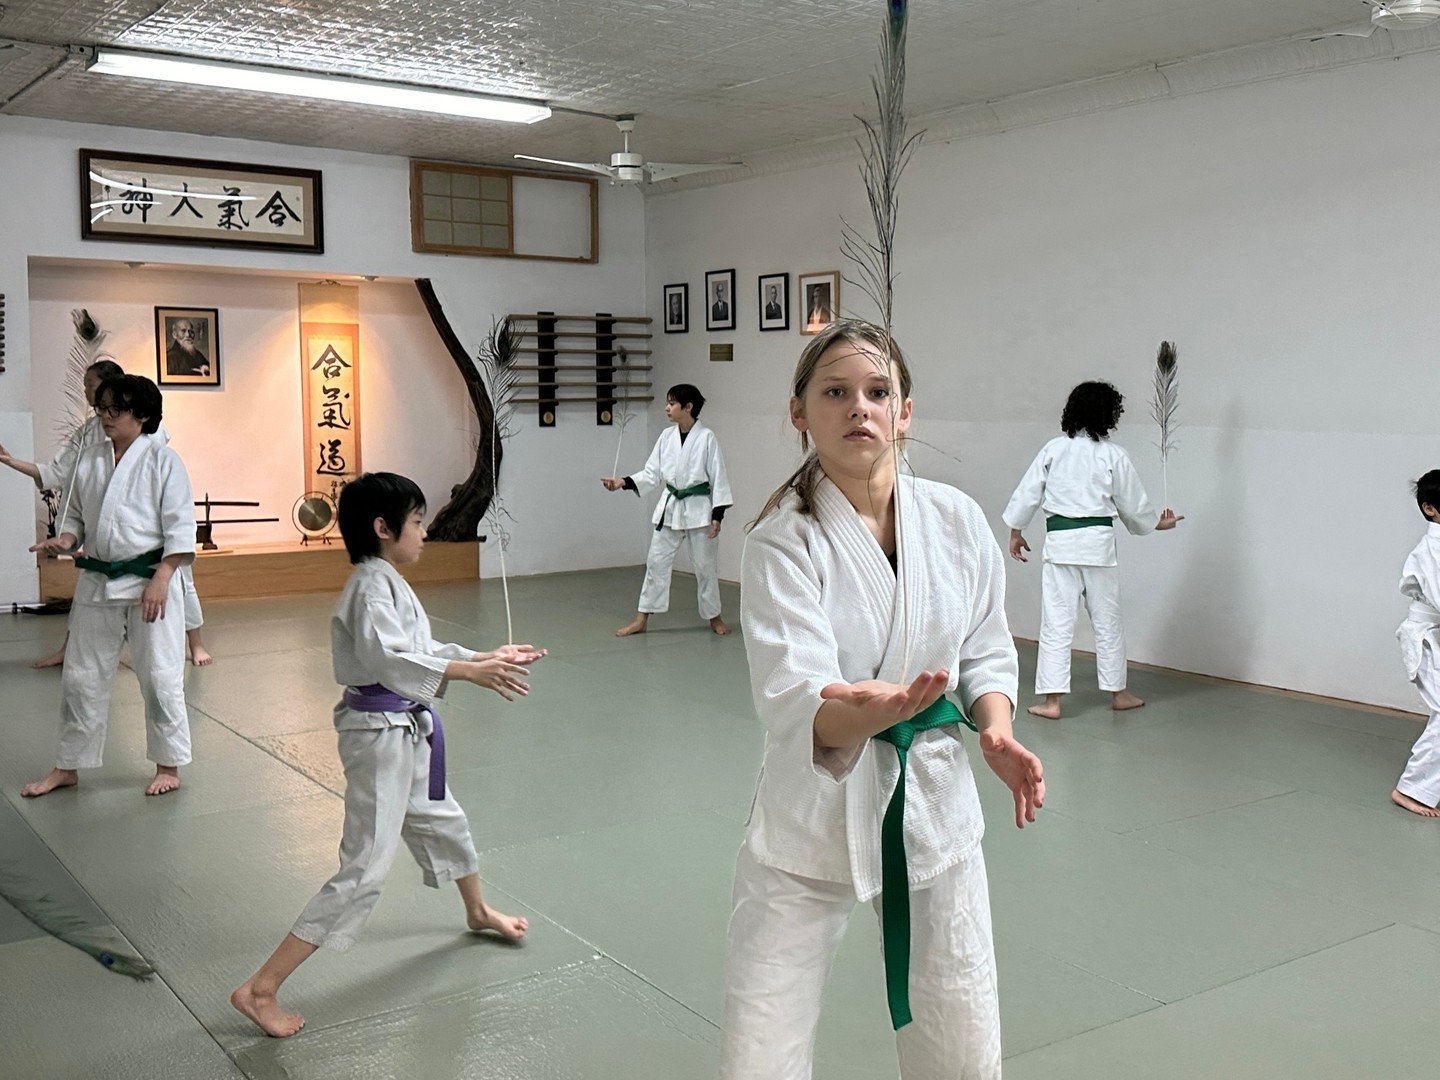 Announcing a new teen aikido class! Starting Friday at 6:45pm taught by Paul Alexander and Crystal Marcus-Kanesaka. ⁠
⁠
Aikido teaches balance, coordination, discipline, cooperation. And it&rsquo;s fun!  Our program builds strong minds and bodies, se